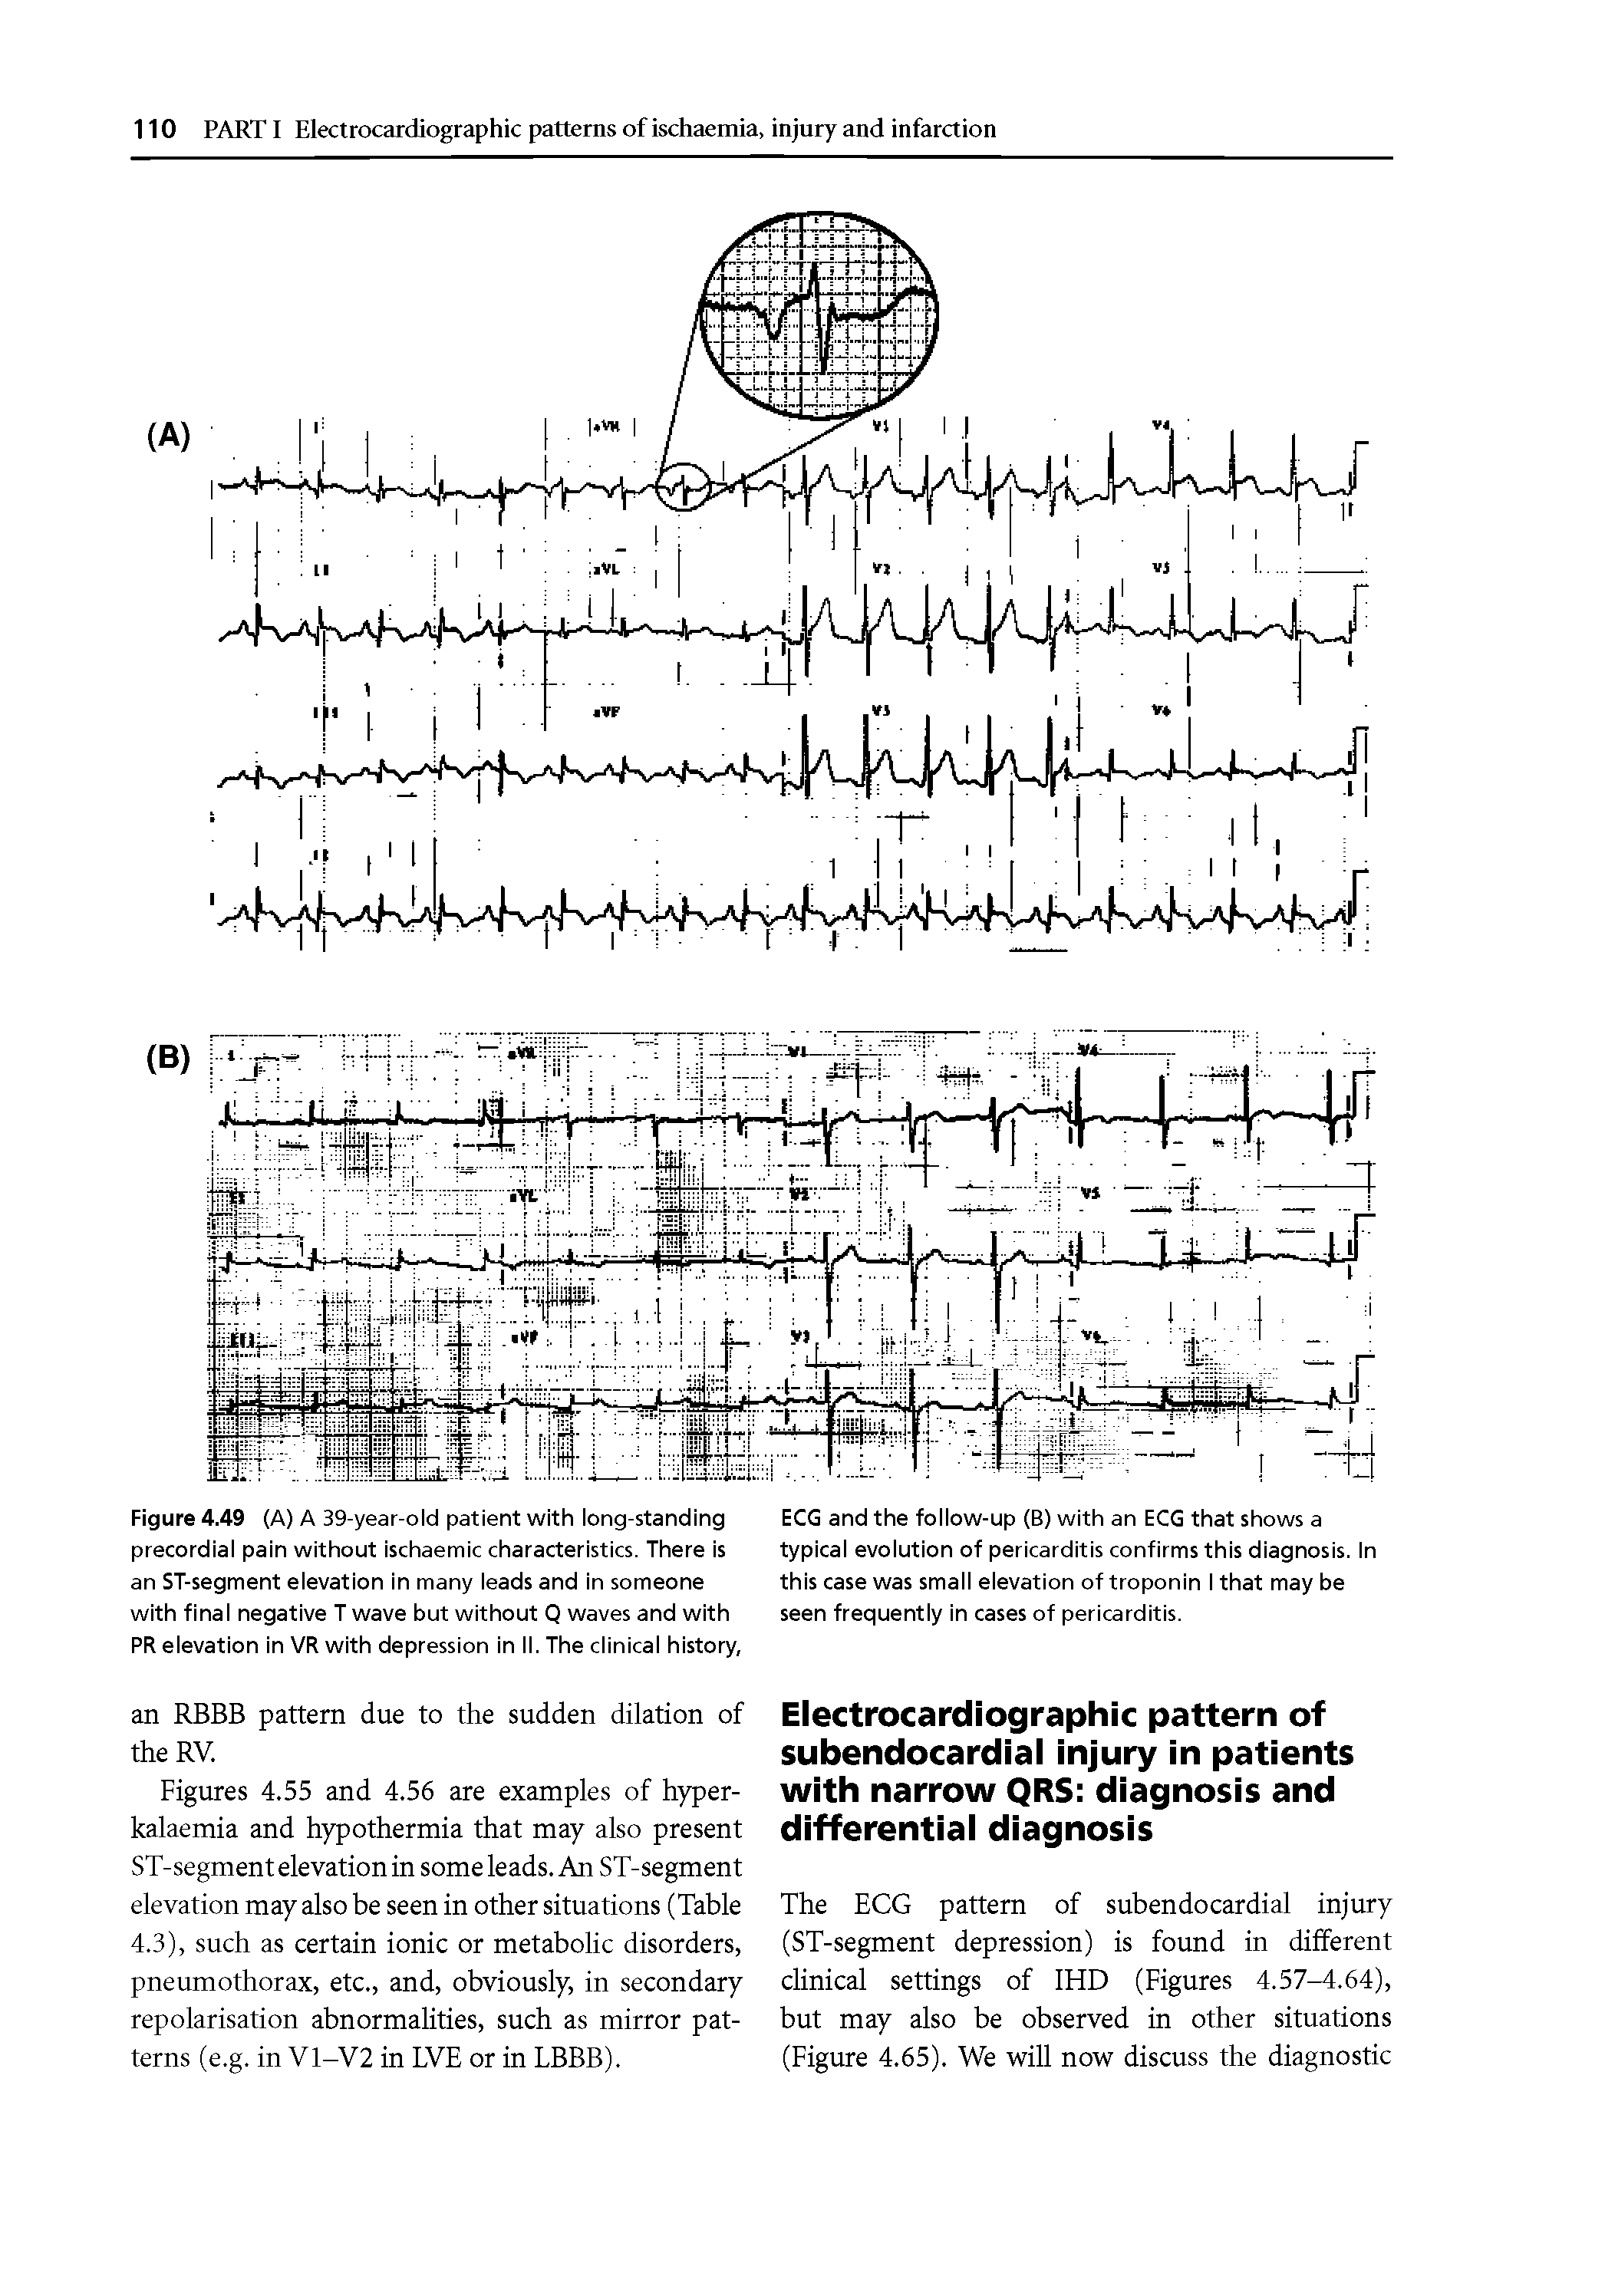 Figures 4.55 and 4.56 are examples of hyper-kalaemia and hypothermia that may also present ST-segment elevation in some leads. An ST-segment elevation may also be seen in other situations (Table 4.3), such as certain ionic or metabolic disorders, pneumothorax, etc., and, obviously, in secondary repolarisation abnormalities, such as mirror patterns (e.g. in V1-V2 in LVE or in LBBB).